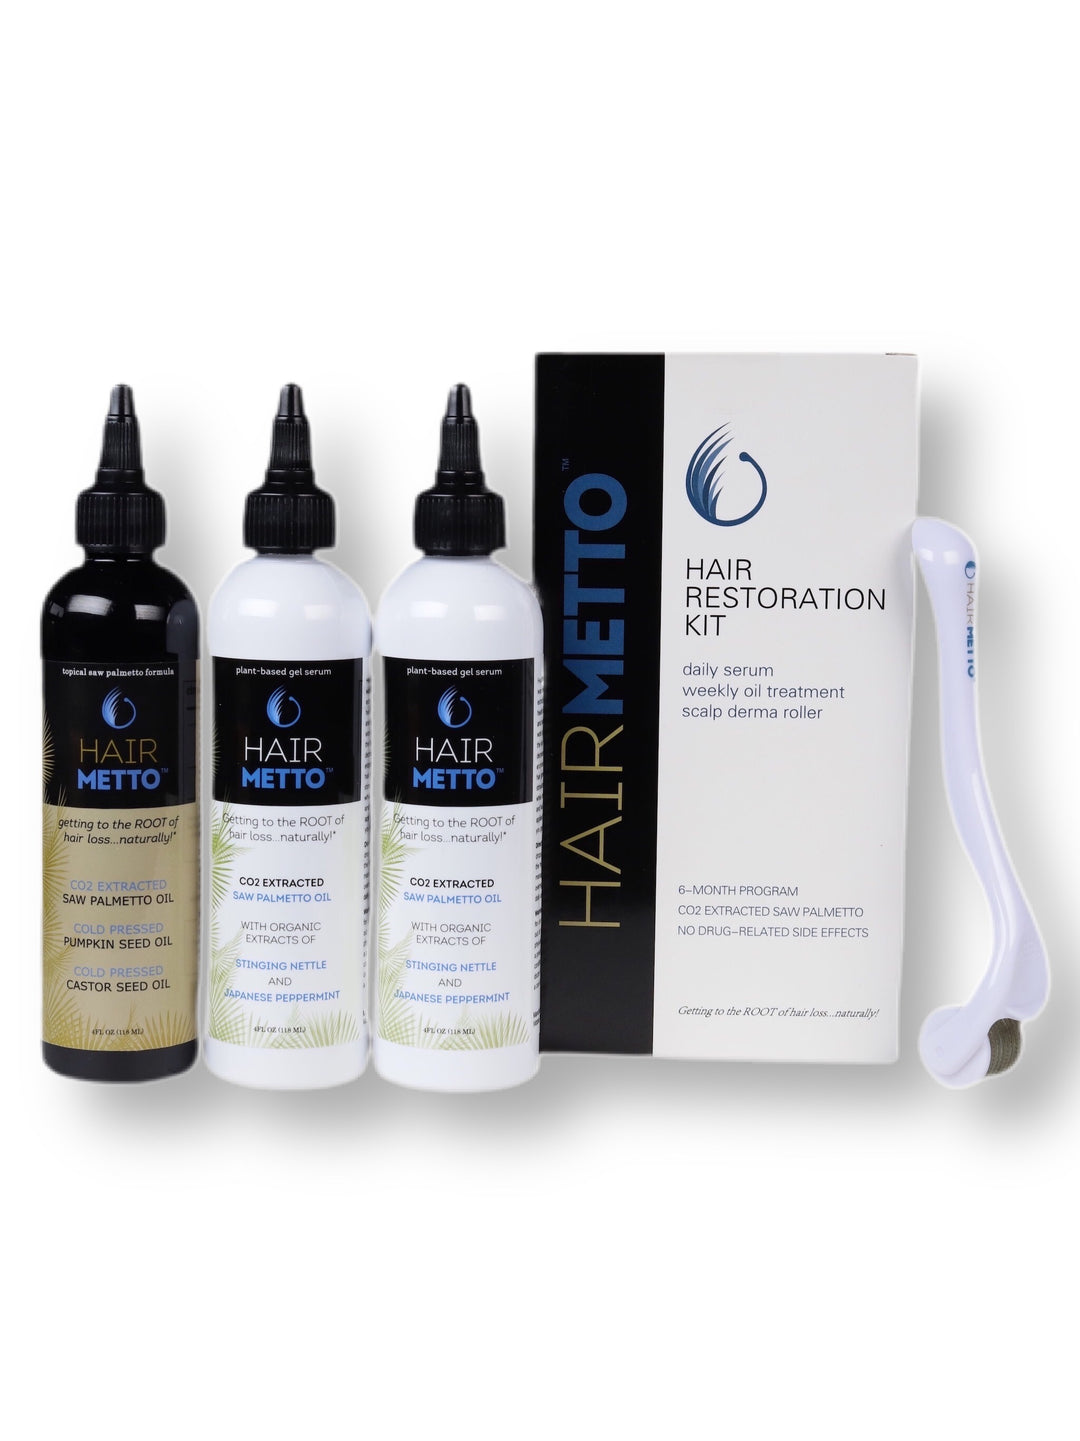 all hairmetto products including topical oil, serum, kit and Dermaroller for hair loss